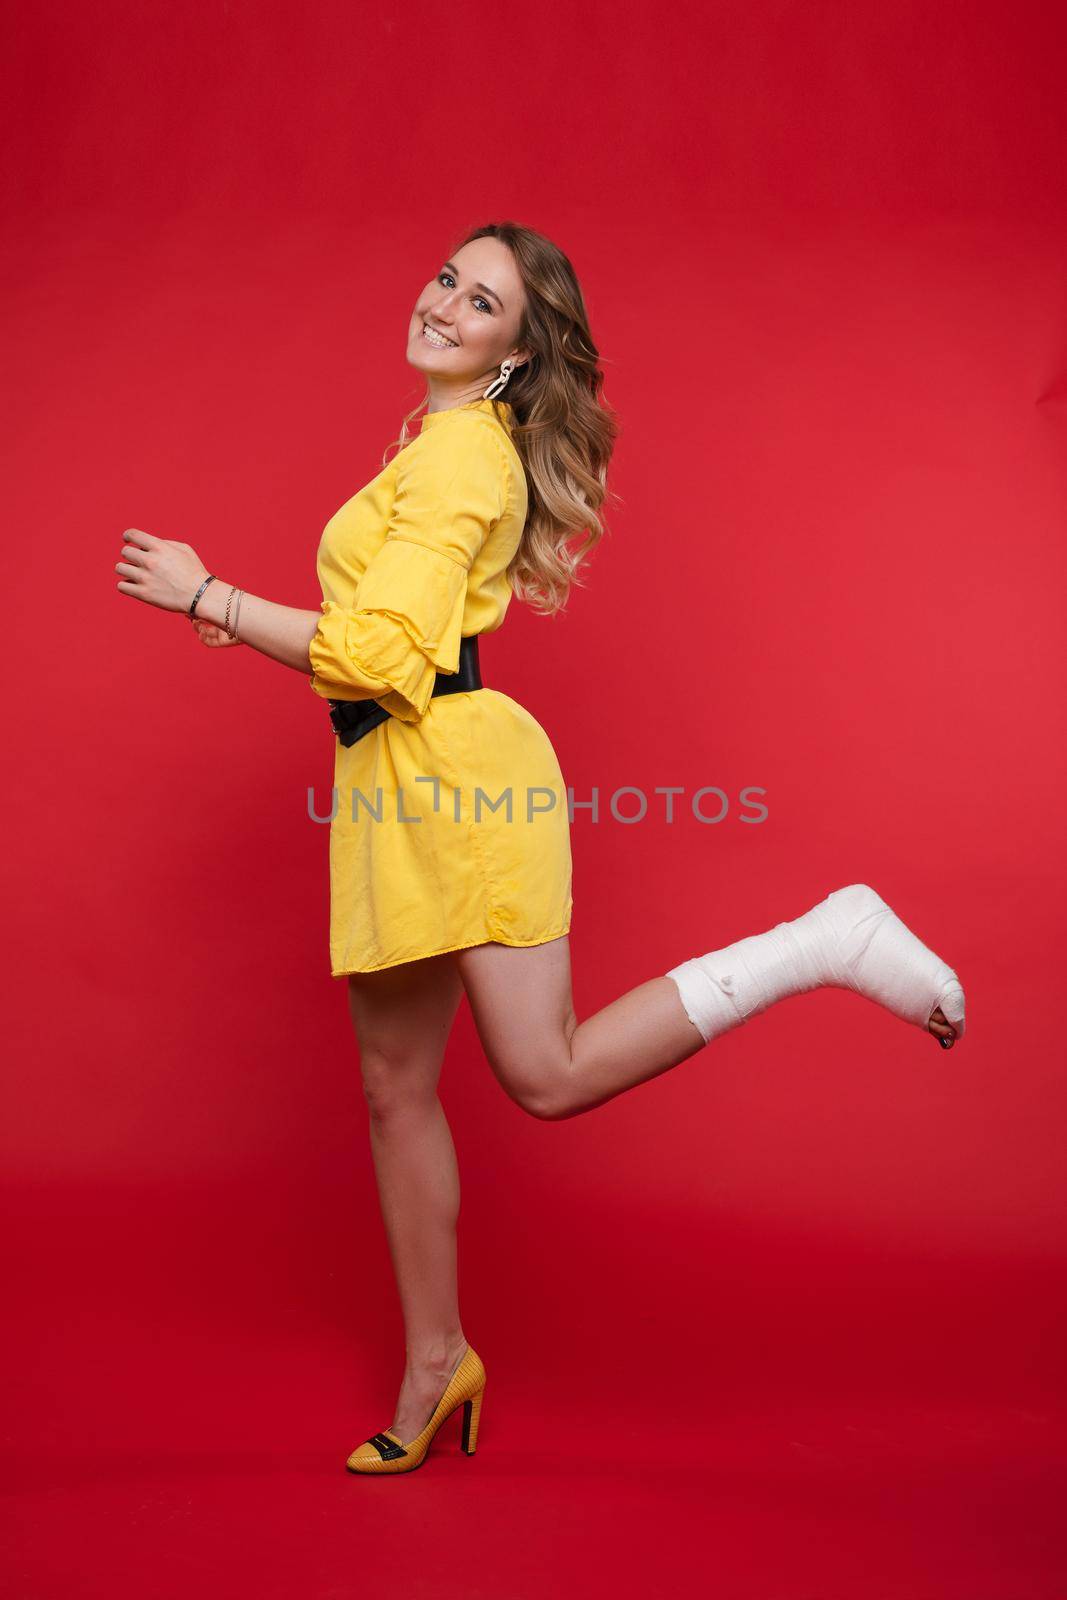 Side view full length shot of pretty young model in elegant yellow dress and belt jumping on high heel with left leg broken in plaster. She is smiling at camera while jumping. Isolate on red.